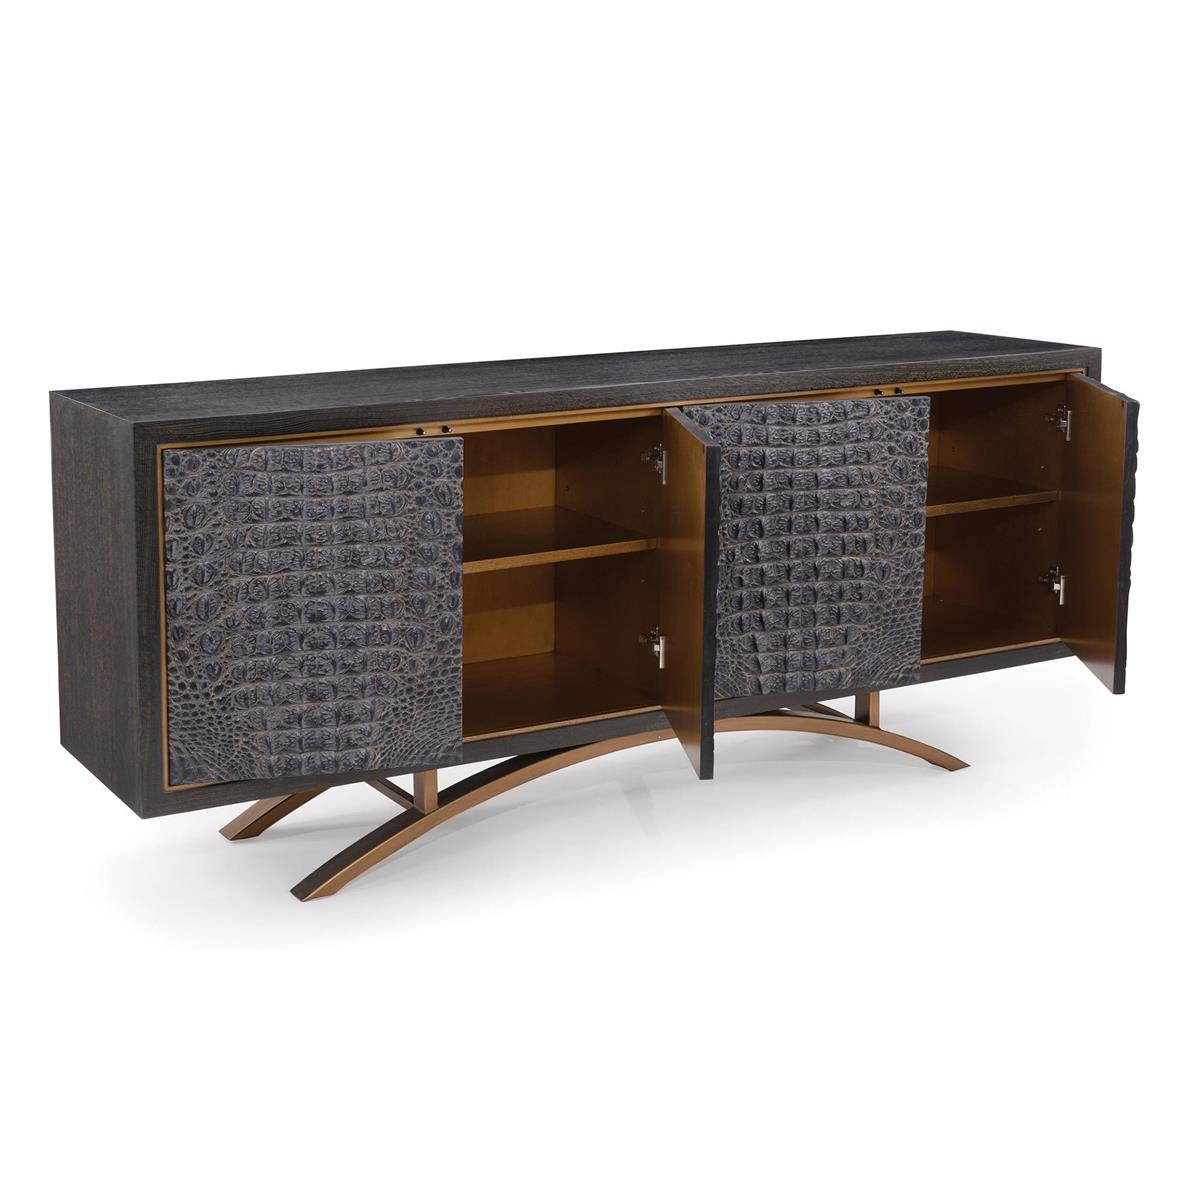 SIDEBOARD 4-DOOR BLACK FAUX CROC WITH GOLD FINISH